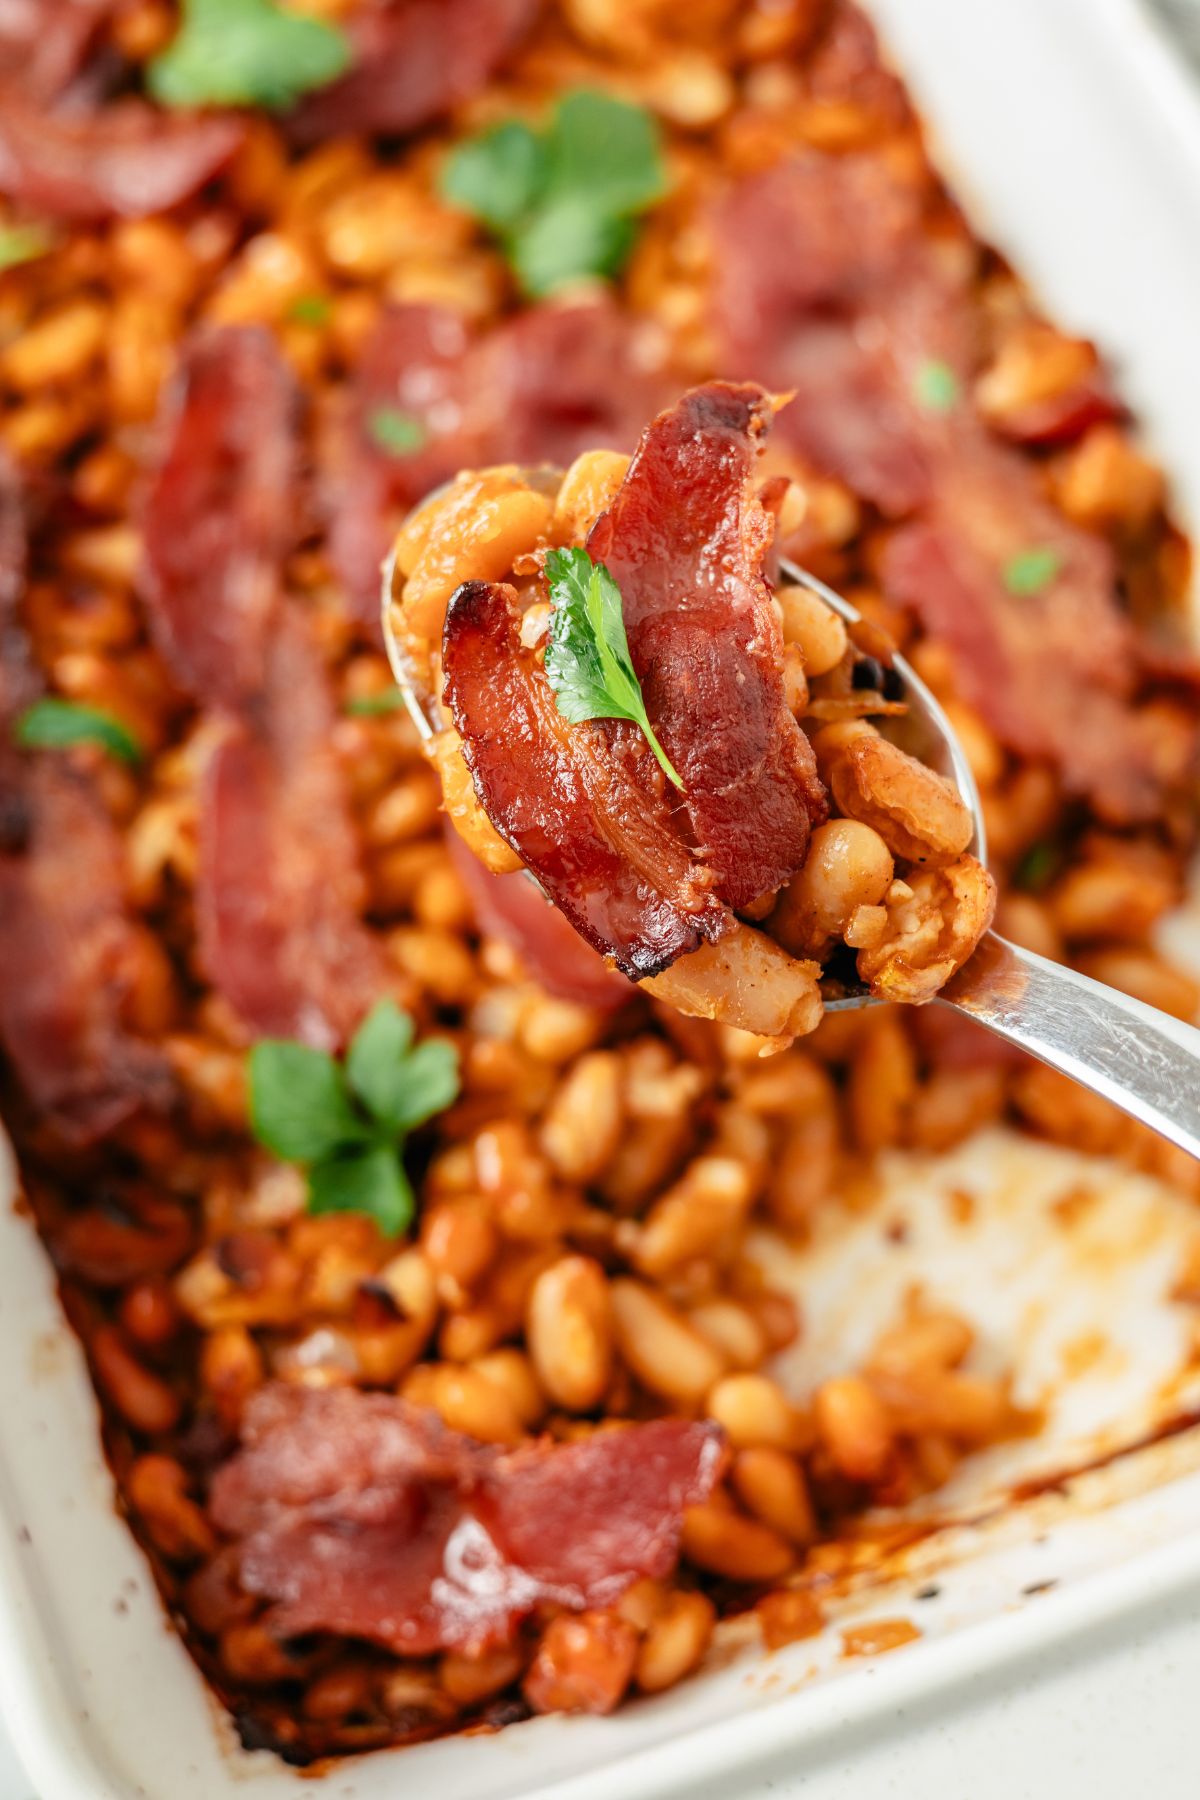 Spoonful of delicious Baked Beans with Canned Beans, showcasing a hearty blend of savory flavors and wholesome ingredients.